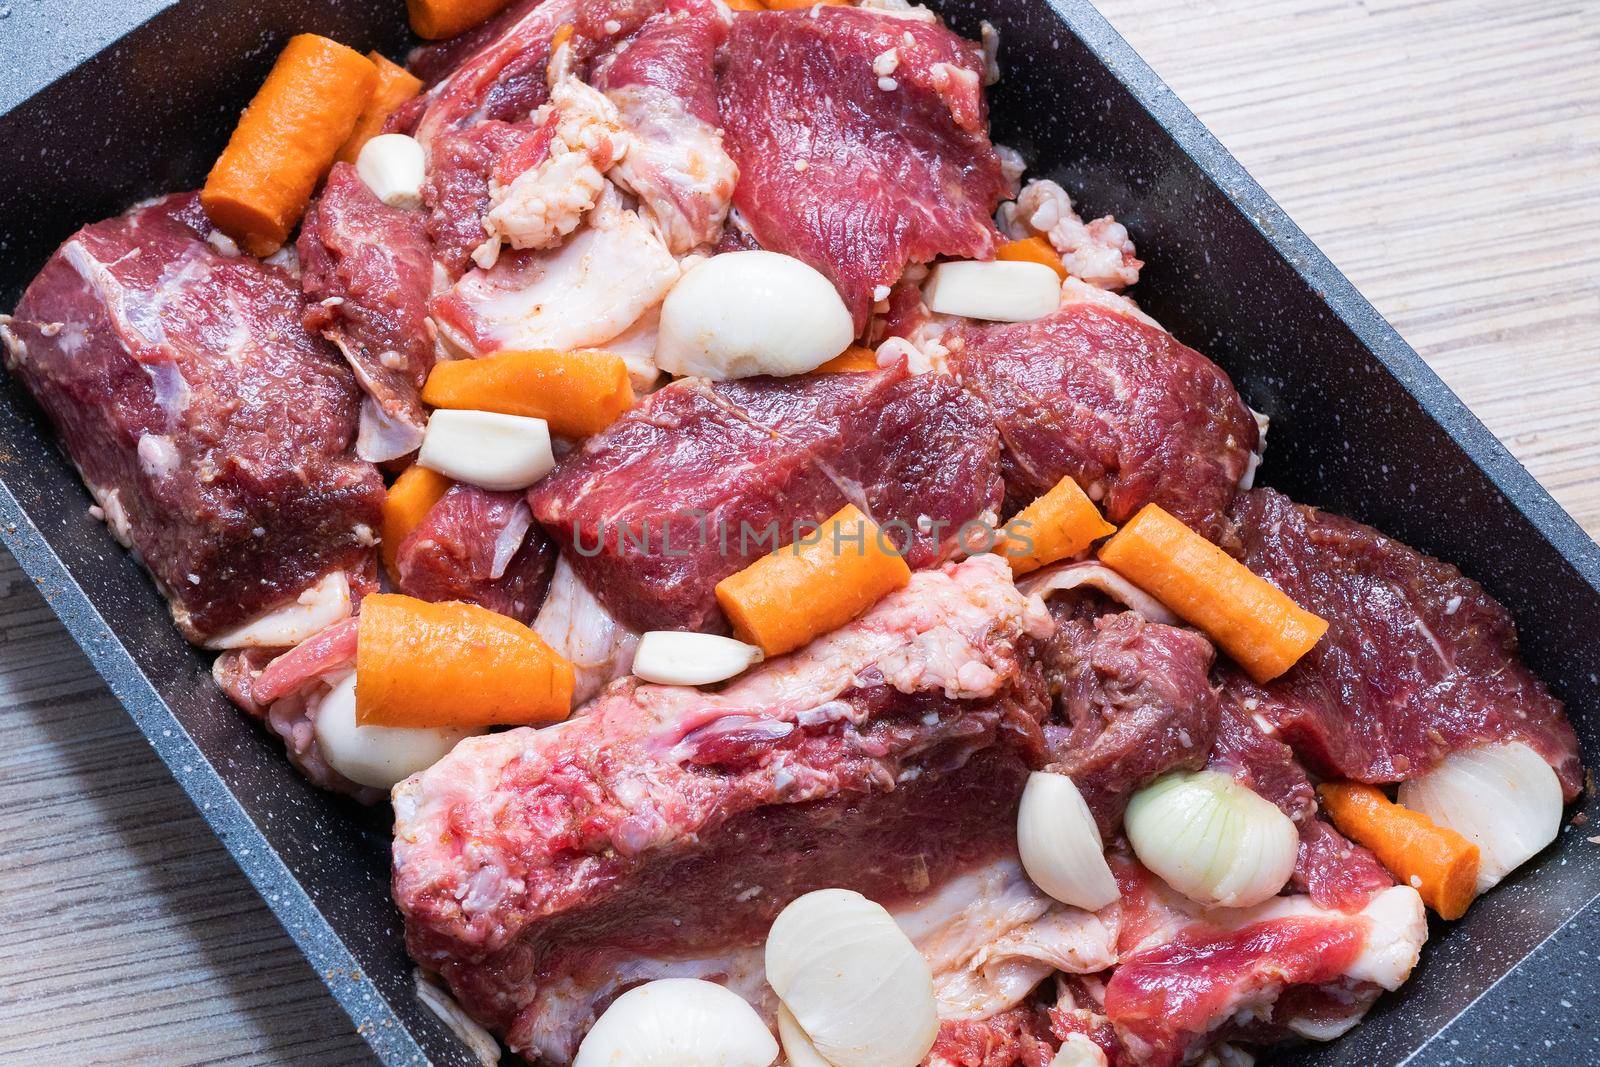 lamb meat on a baking sheet marinated with spices, vegetable oil, carrots and onions ready for baking in the oven by olex